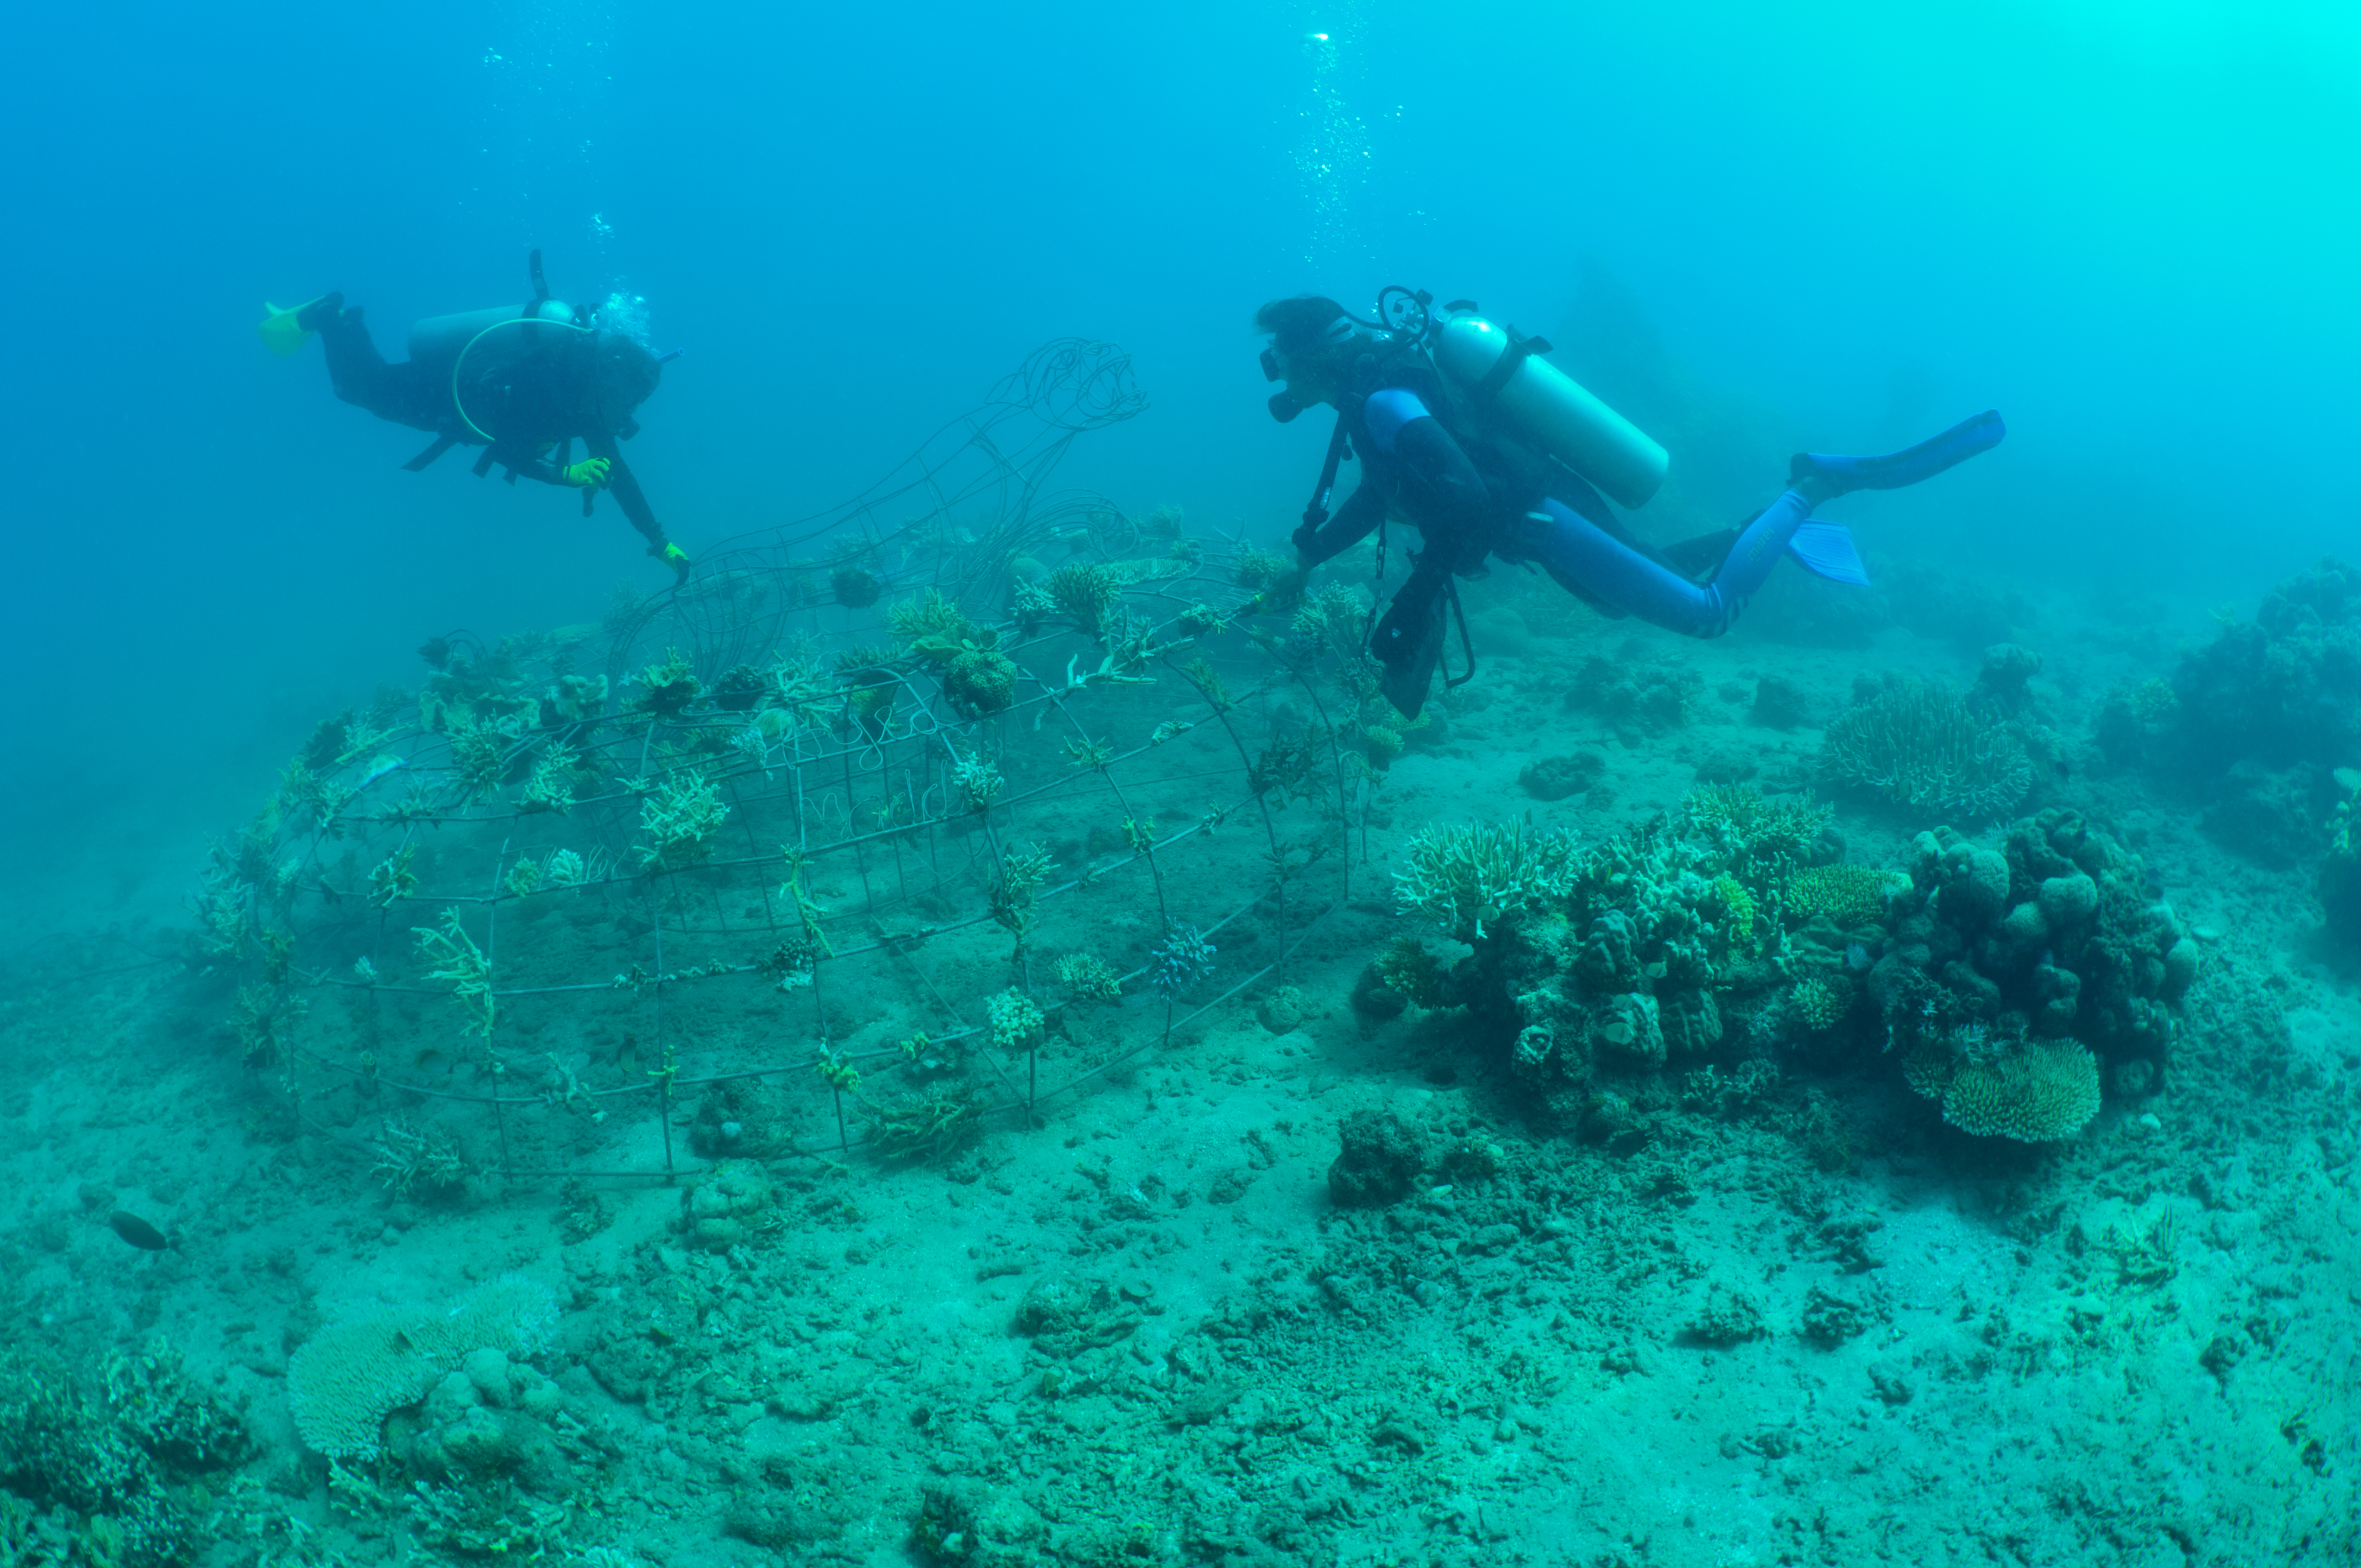 Underwater shot of two divers above an artificial coral reef